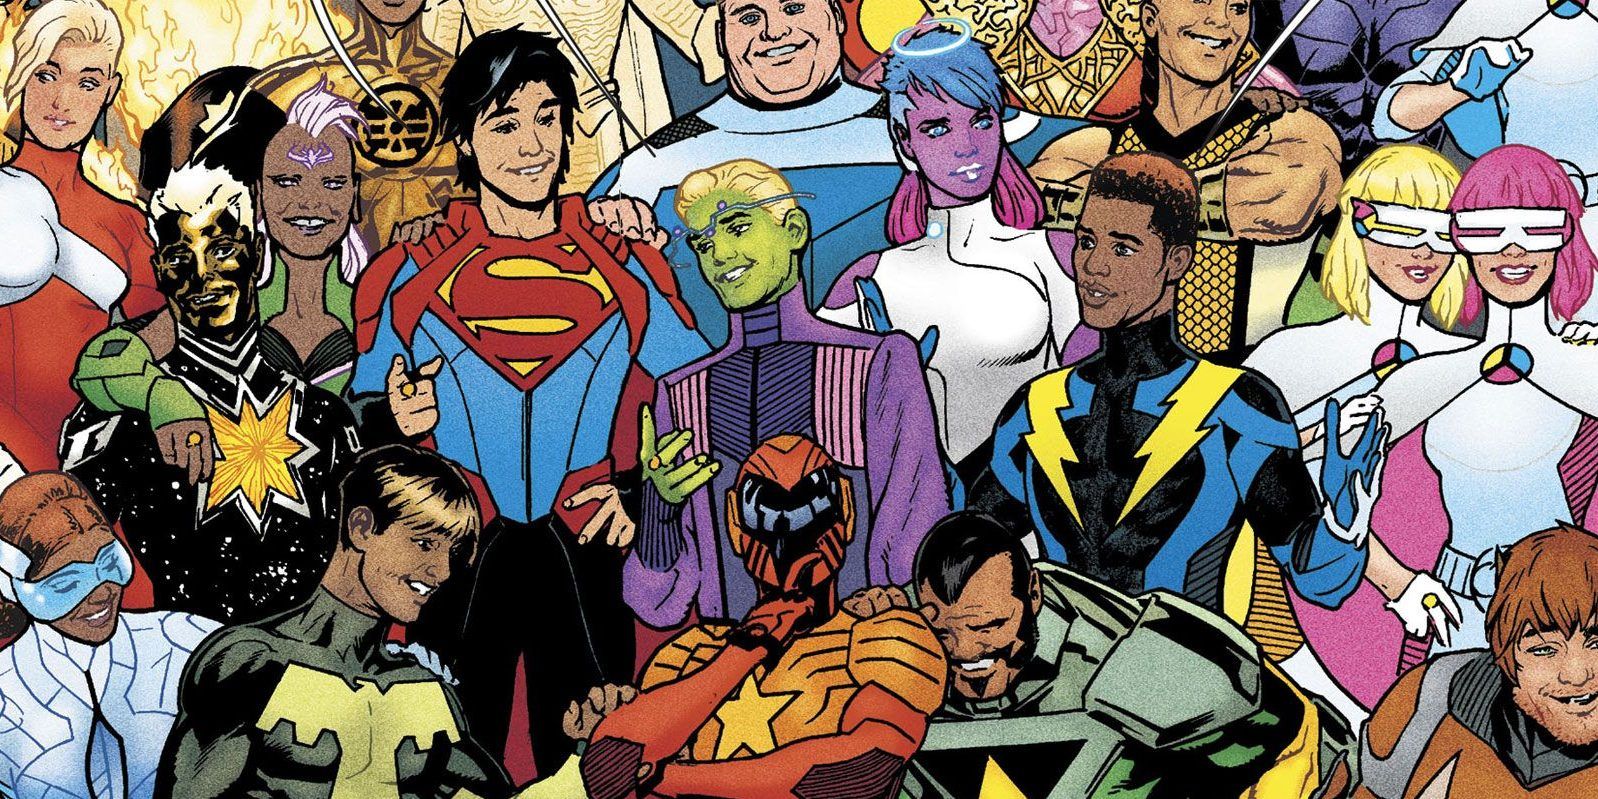 The Legion of Super-Heroes together